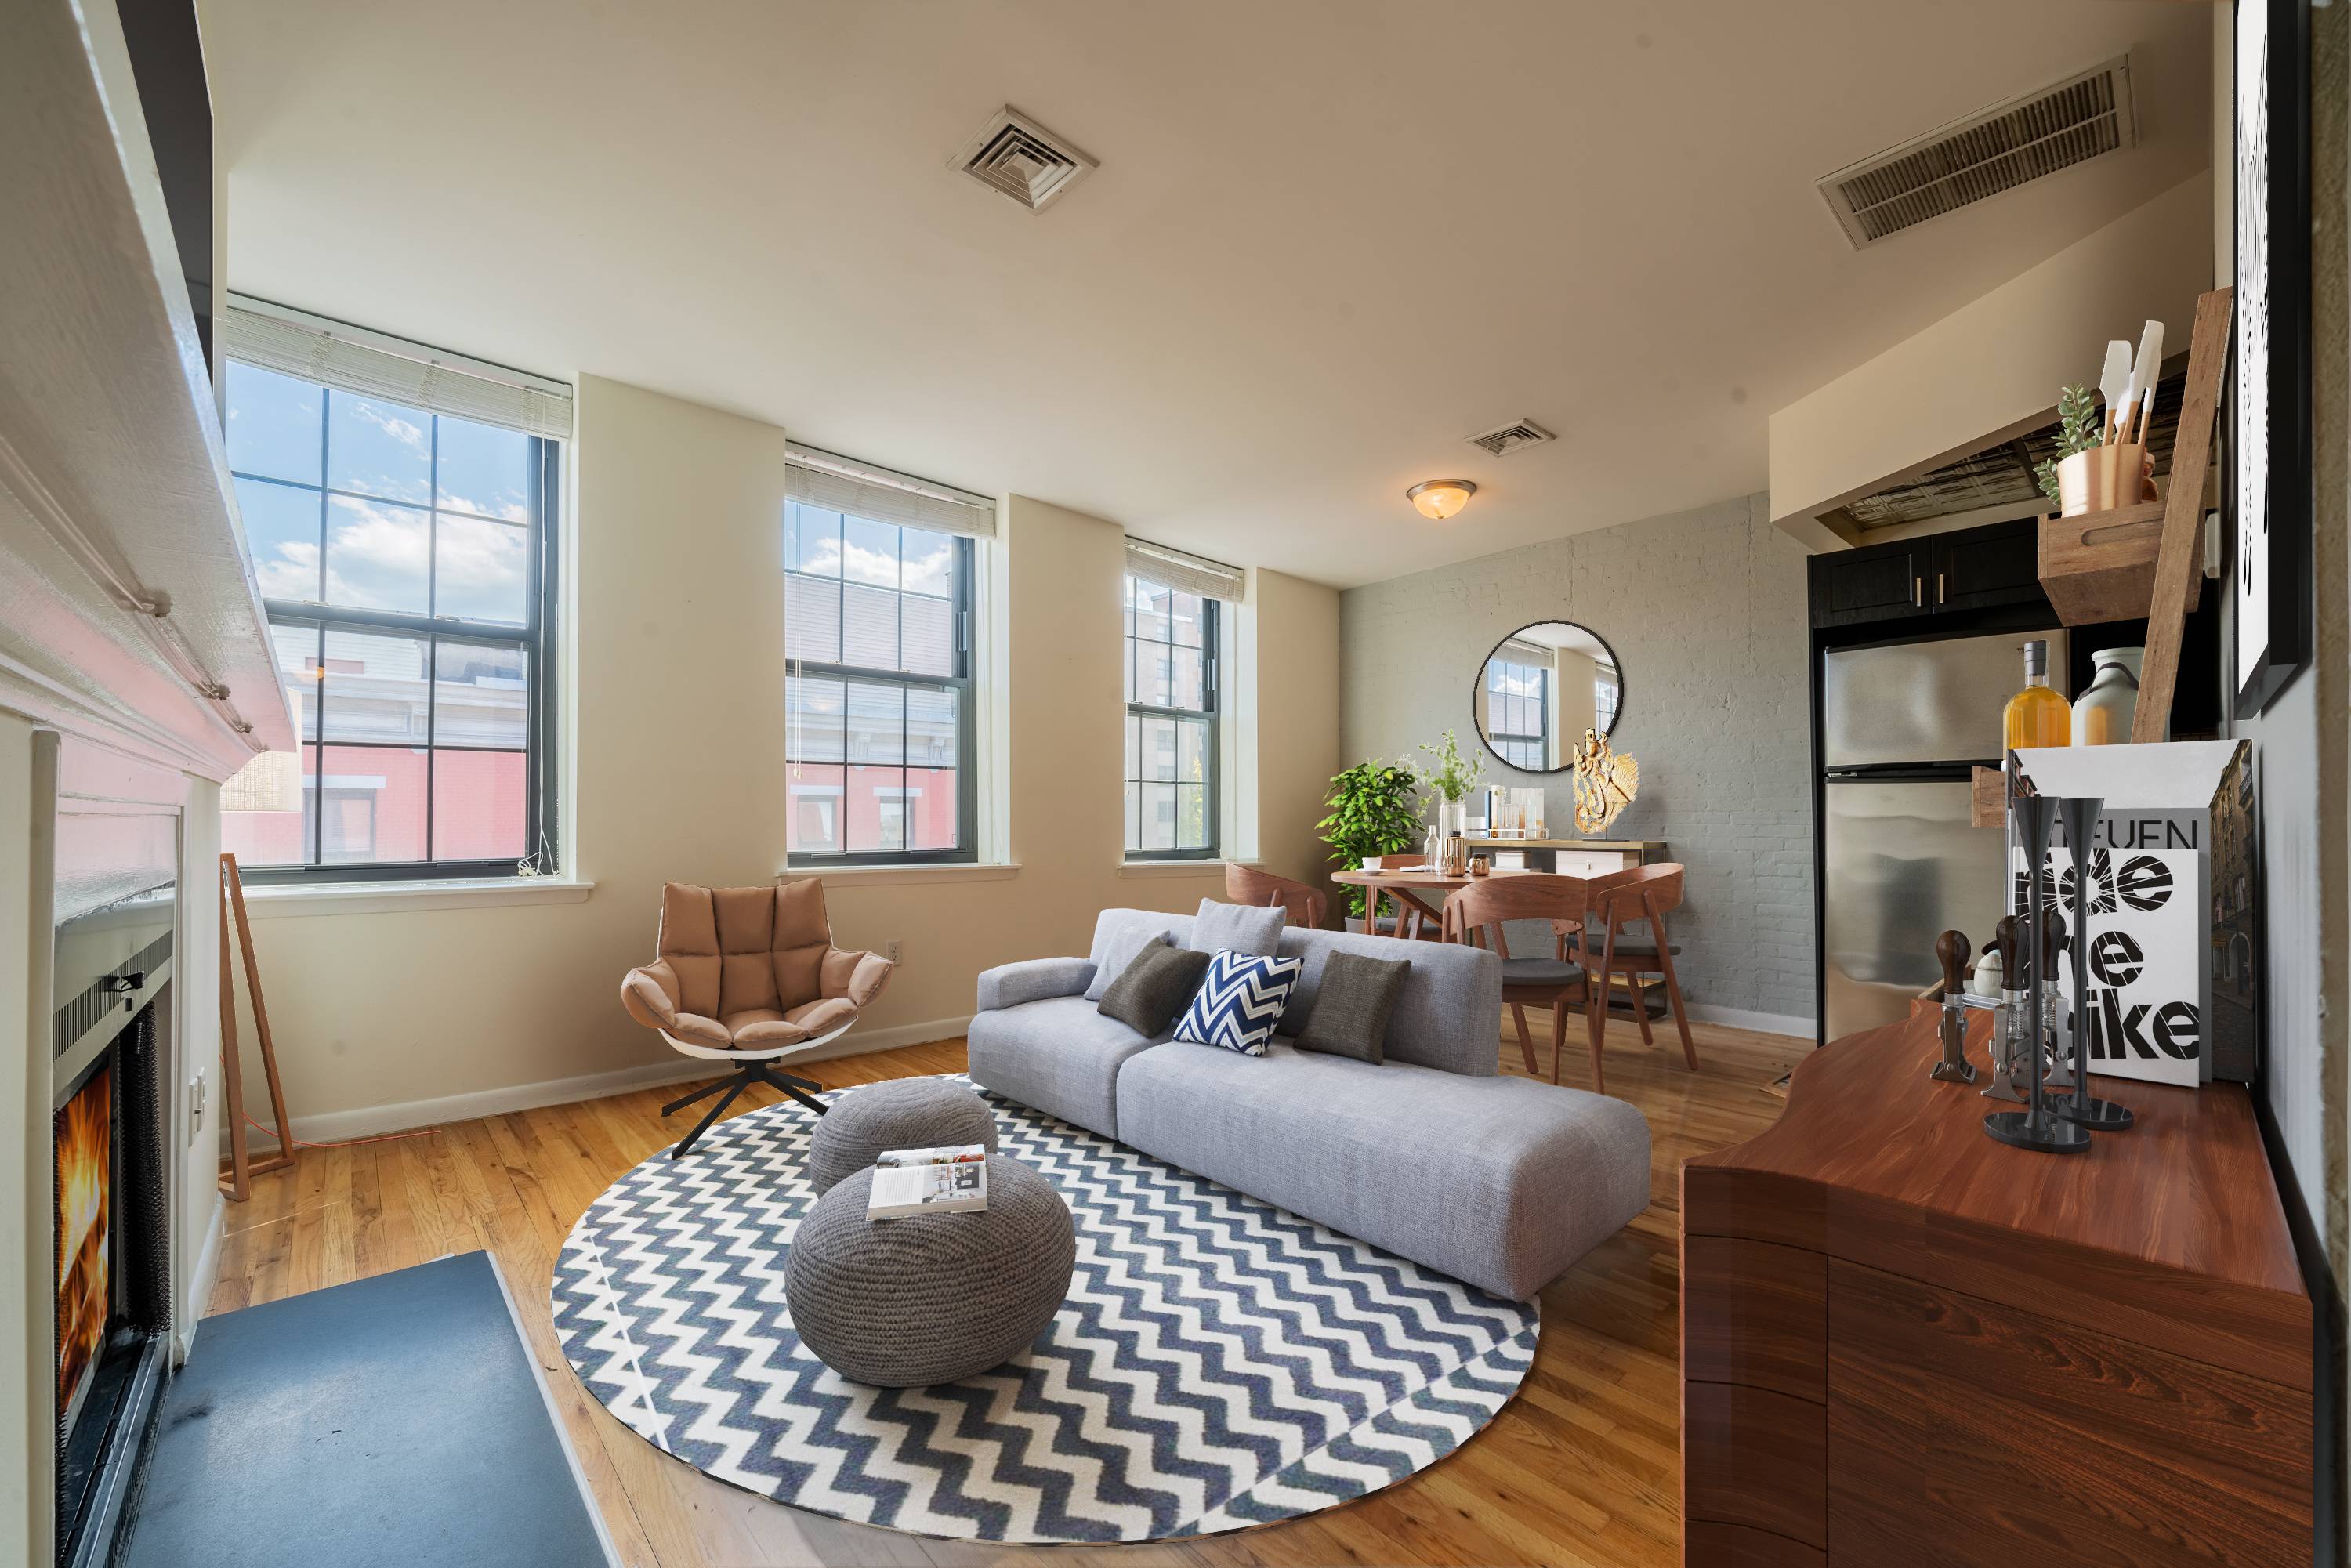 Stunning 1BR Duplex Soho-Style Loft with Private Roofdeck Terrace located in the heart of Downtown Hoboken!  Studio - 3 Bedroom Homes!  No Broker Fees! Close to Washington Street, Hoboken Path and Lightrail!